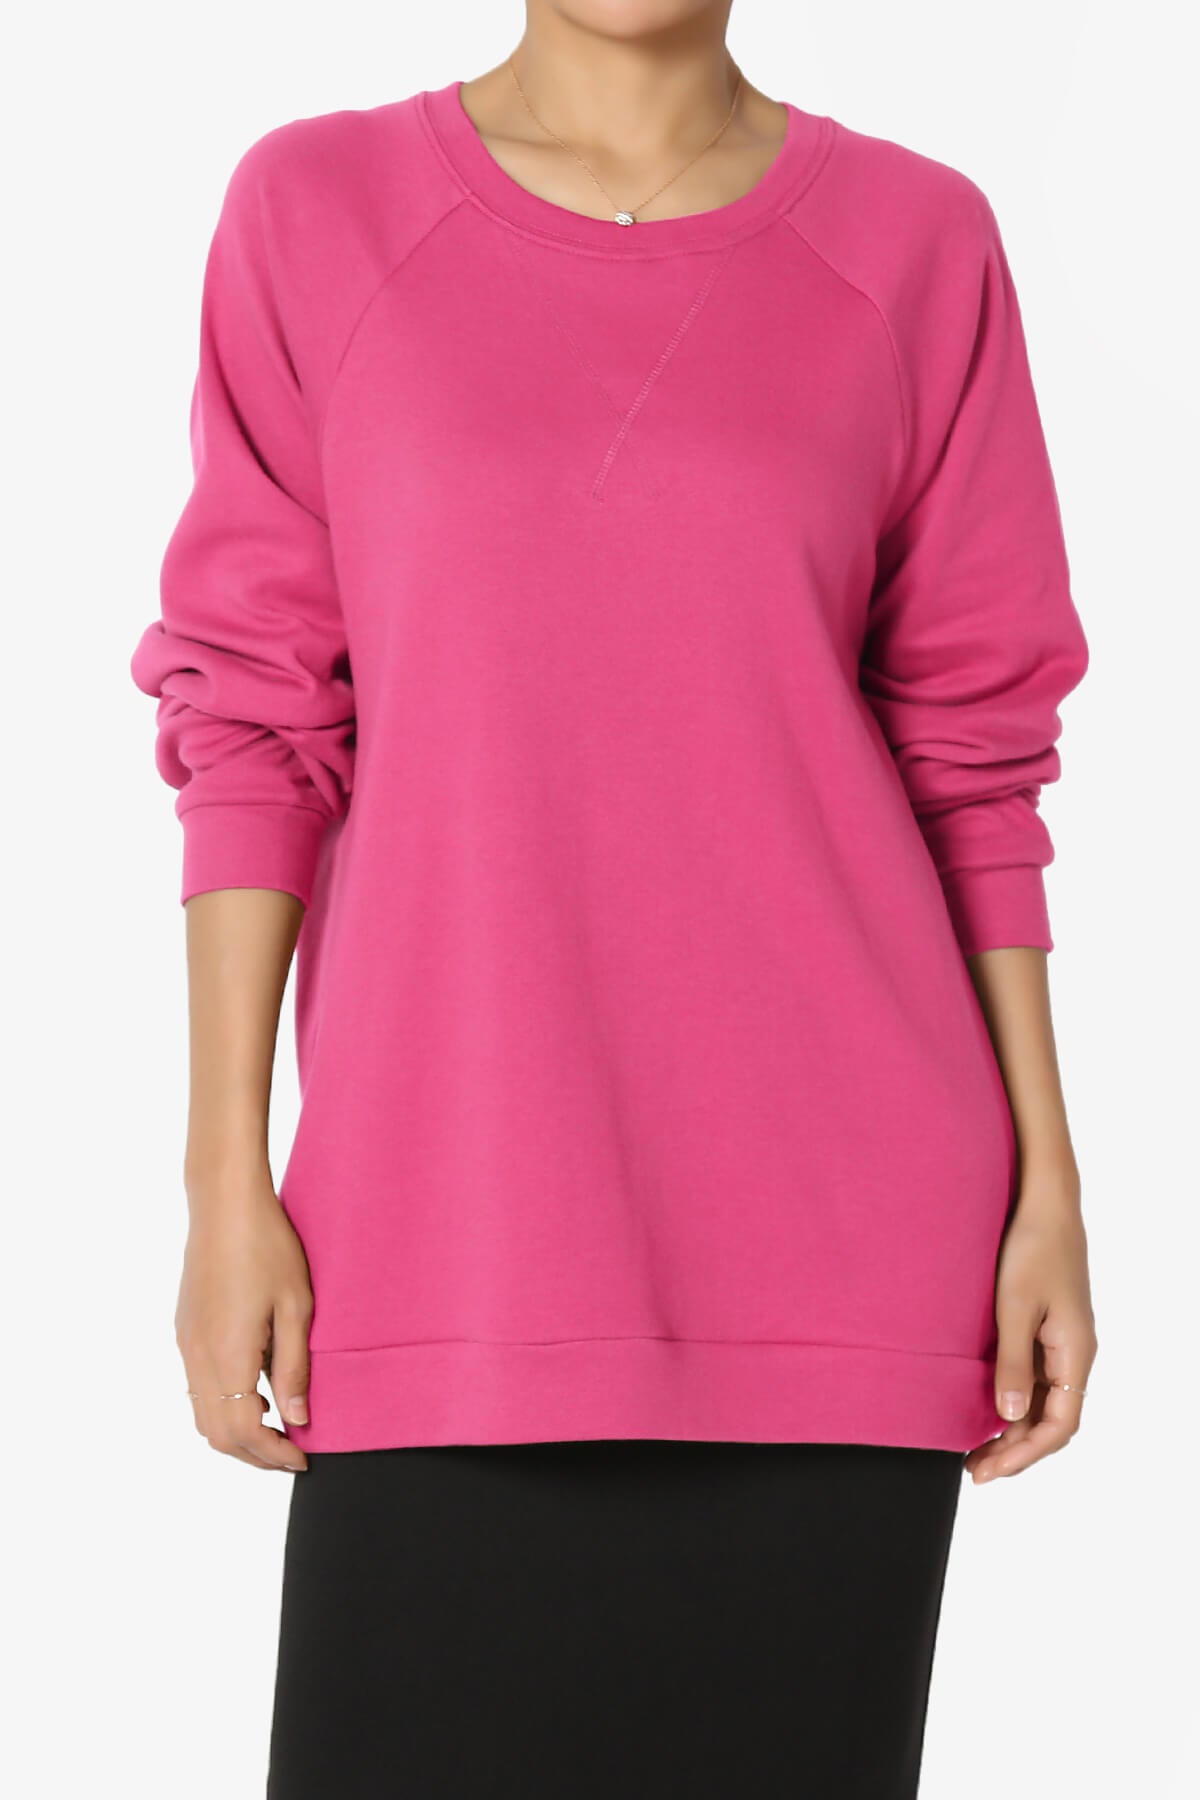 Load image into Gallery viewer, Carlene Cotton Raglan Sleeve Pullover Top HOT PINK_1
